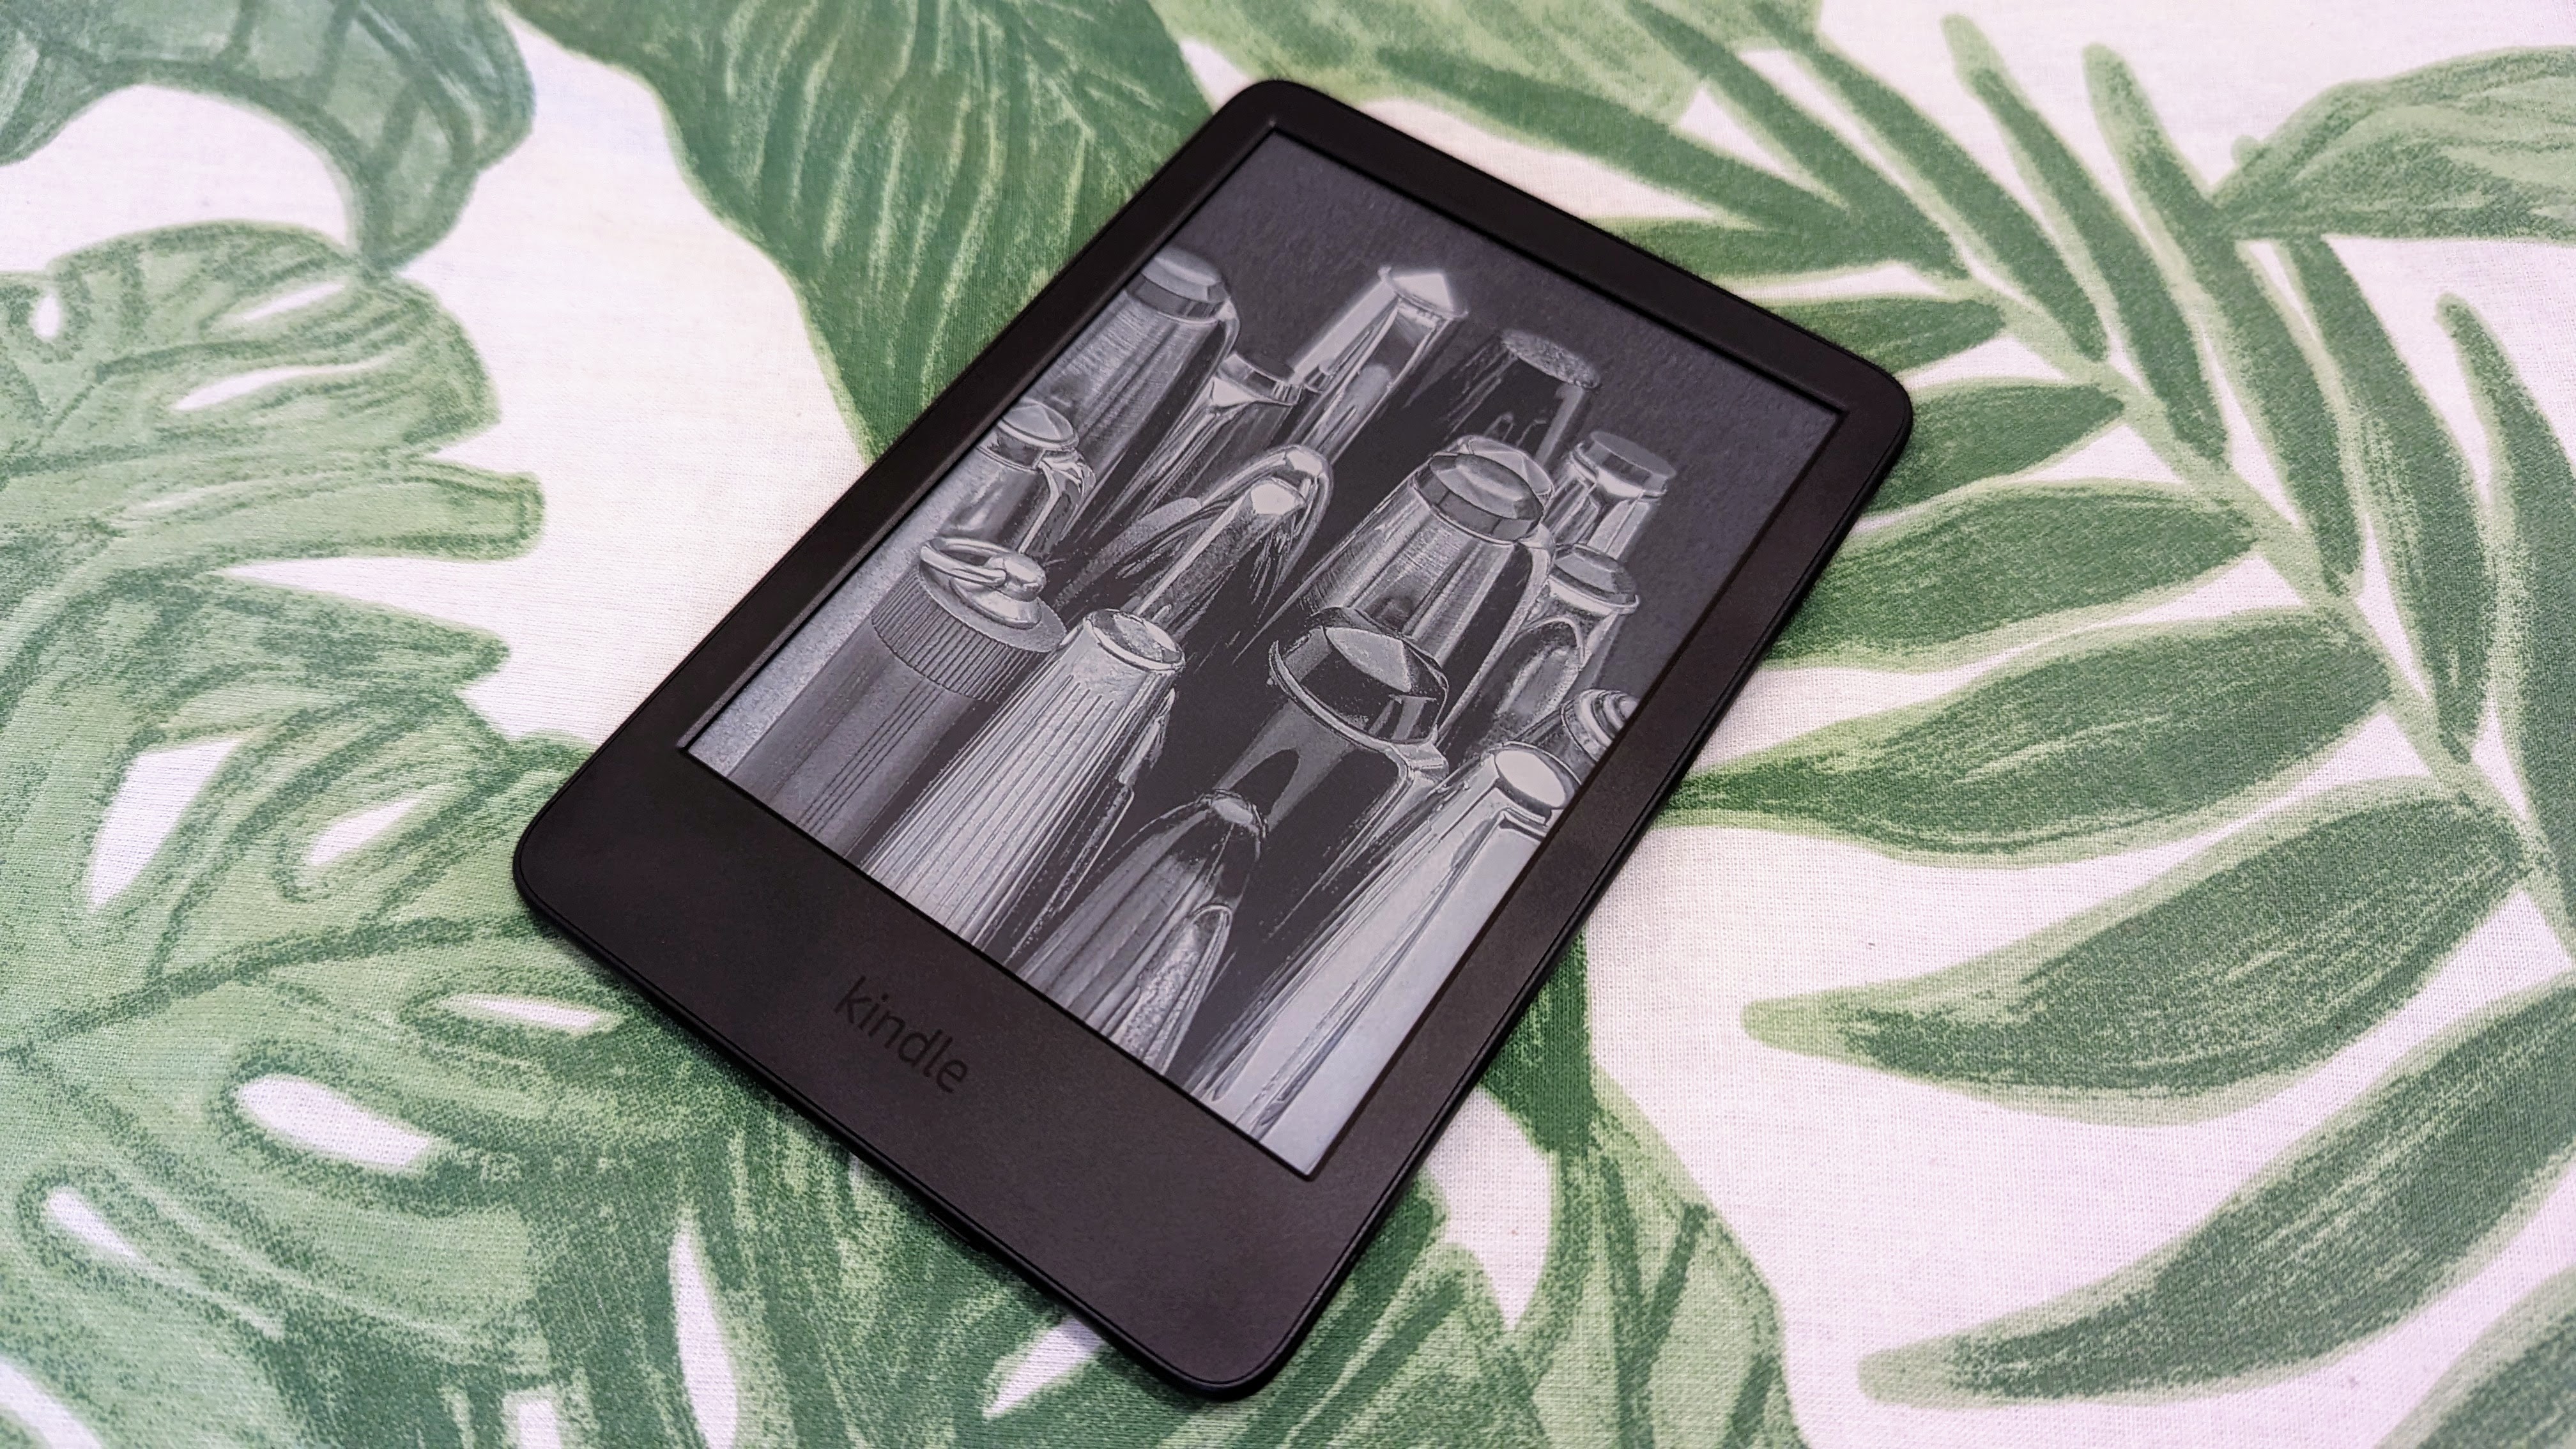 Kindle (2022) Review